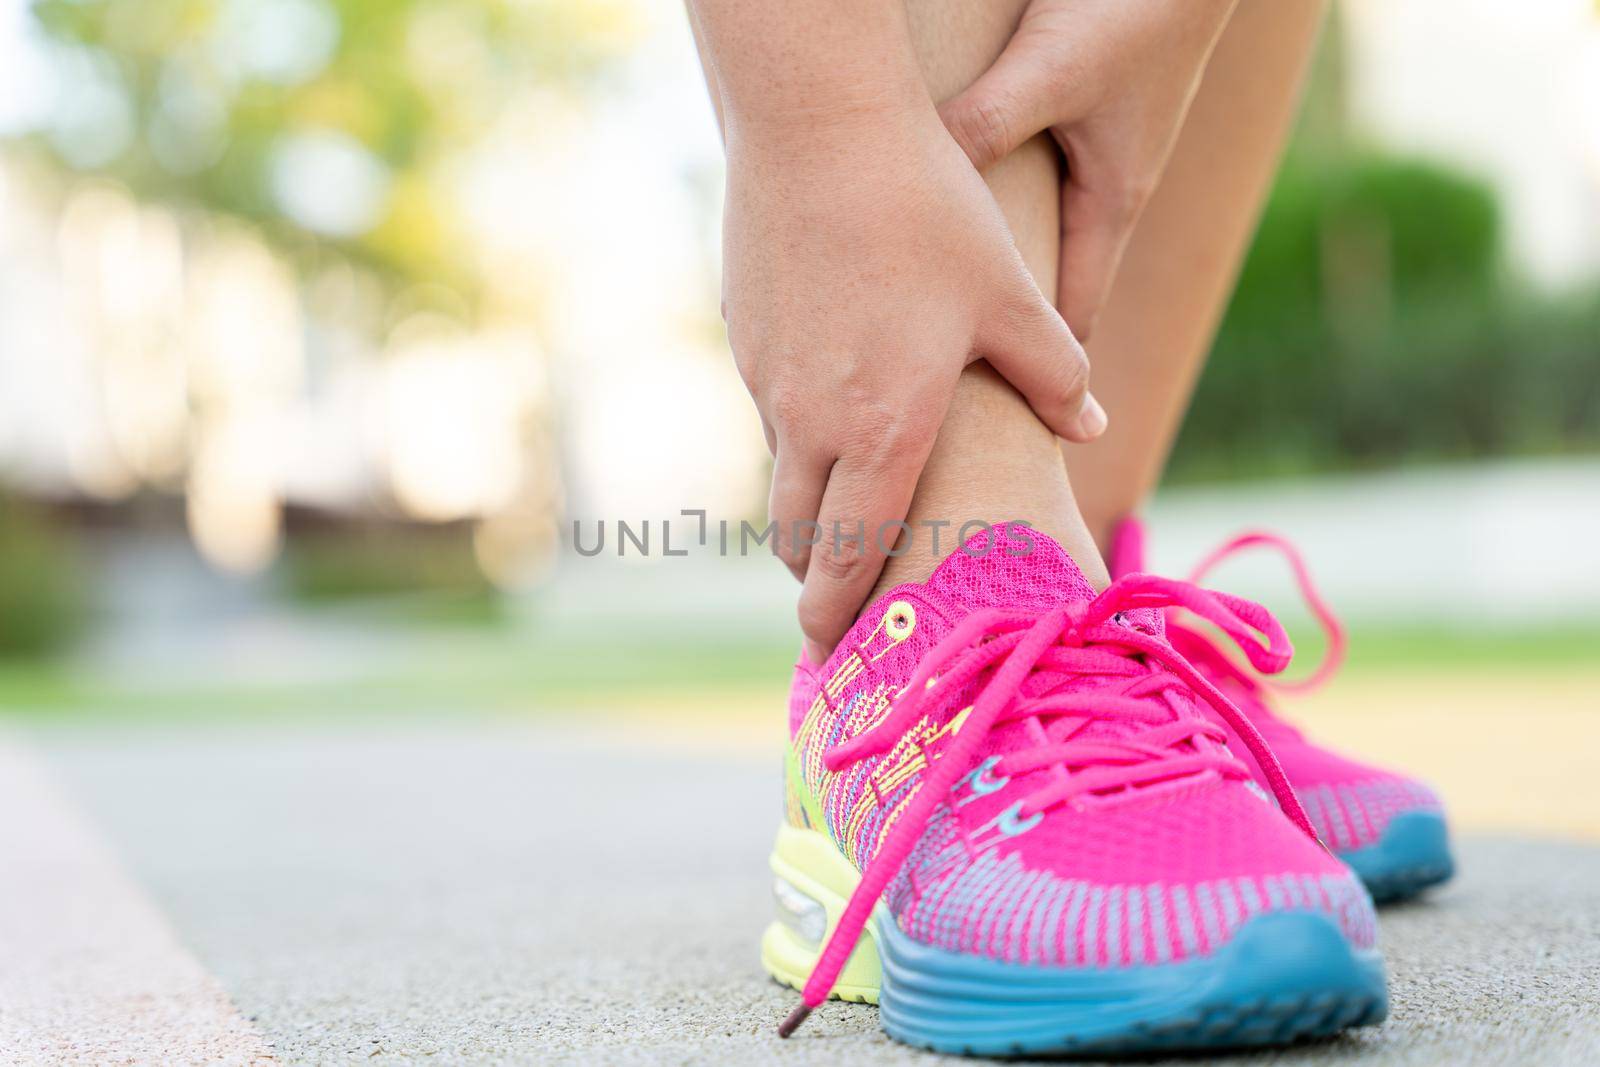 Female fatty runner athlete leg injury and pain. Hands grab painful ankle while running in the park. by mikesaran